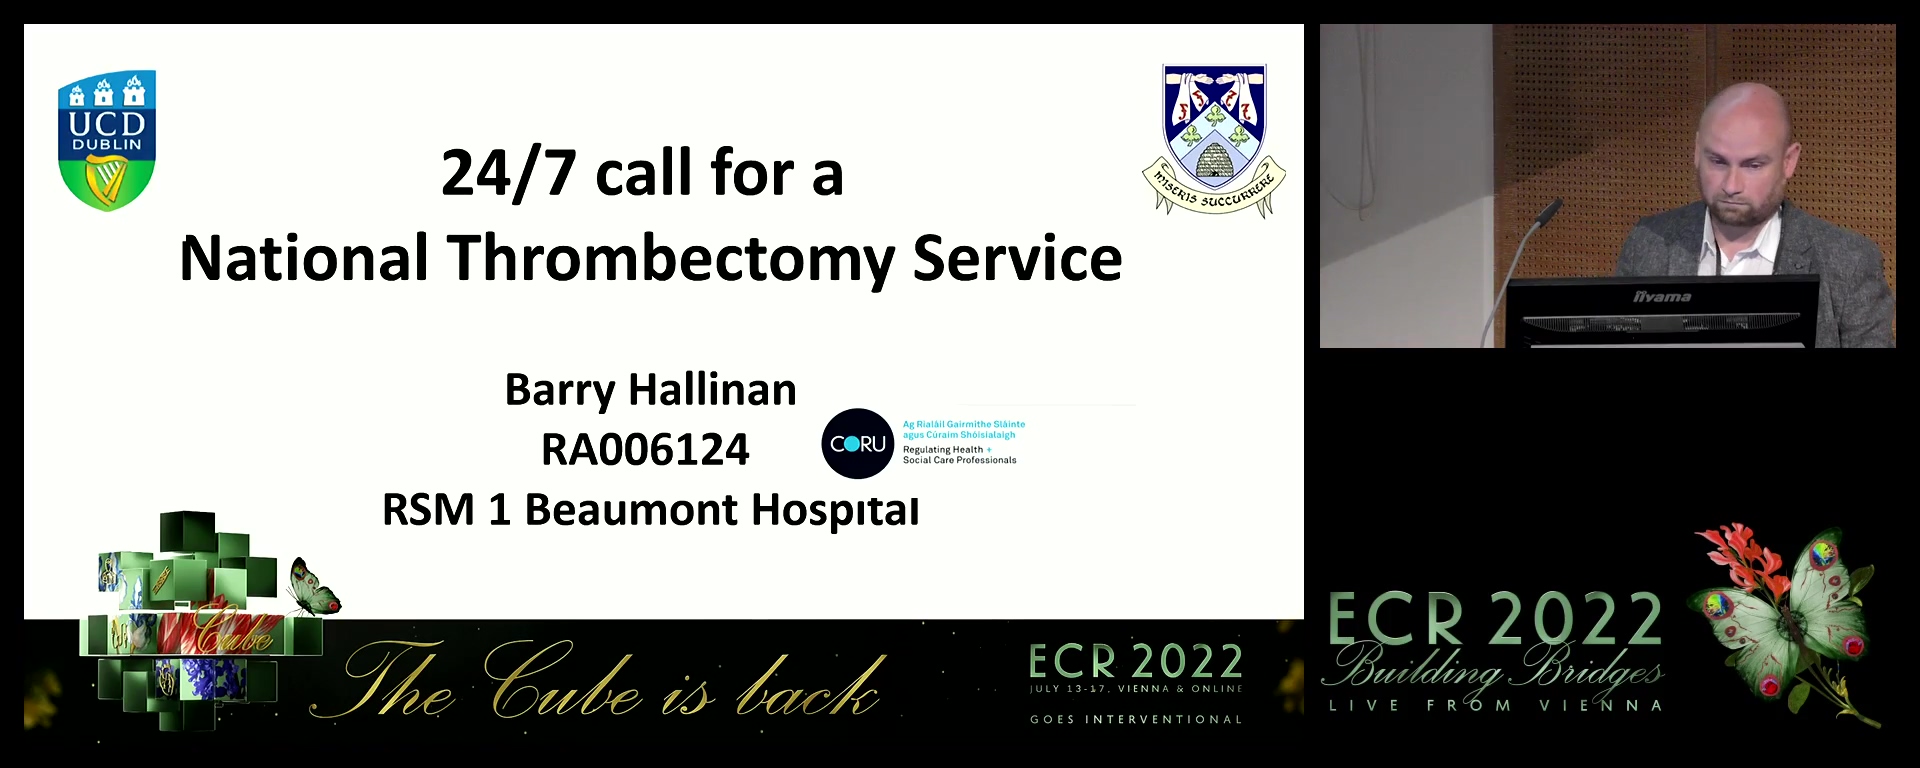 24/7 call for a national thrombectomy service